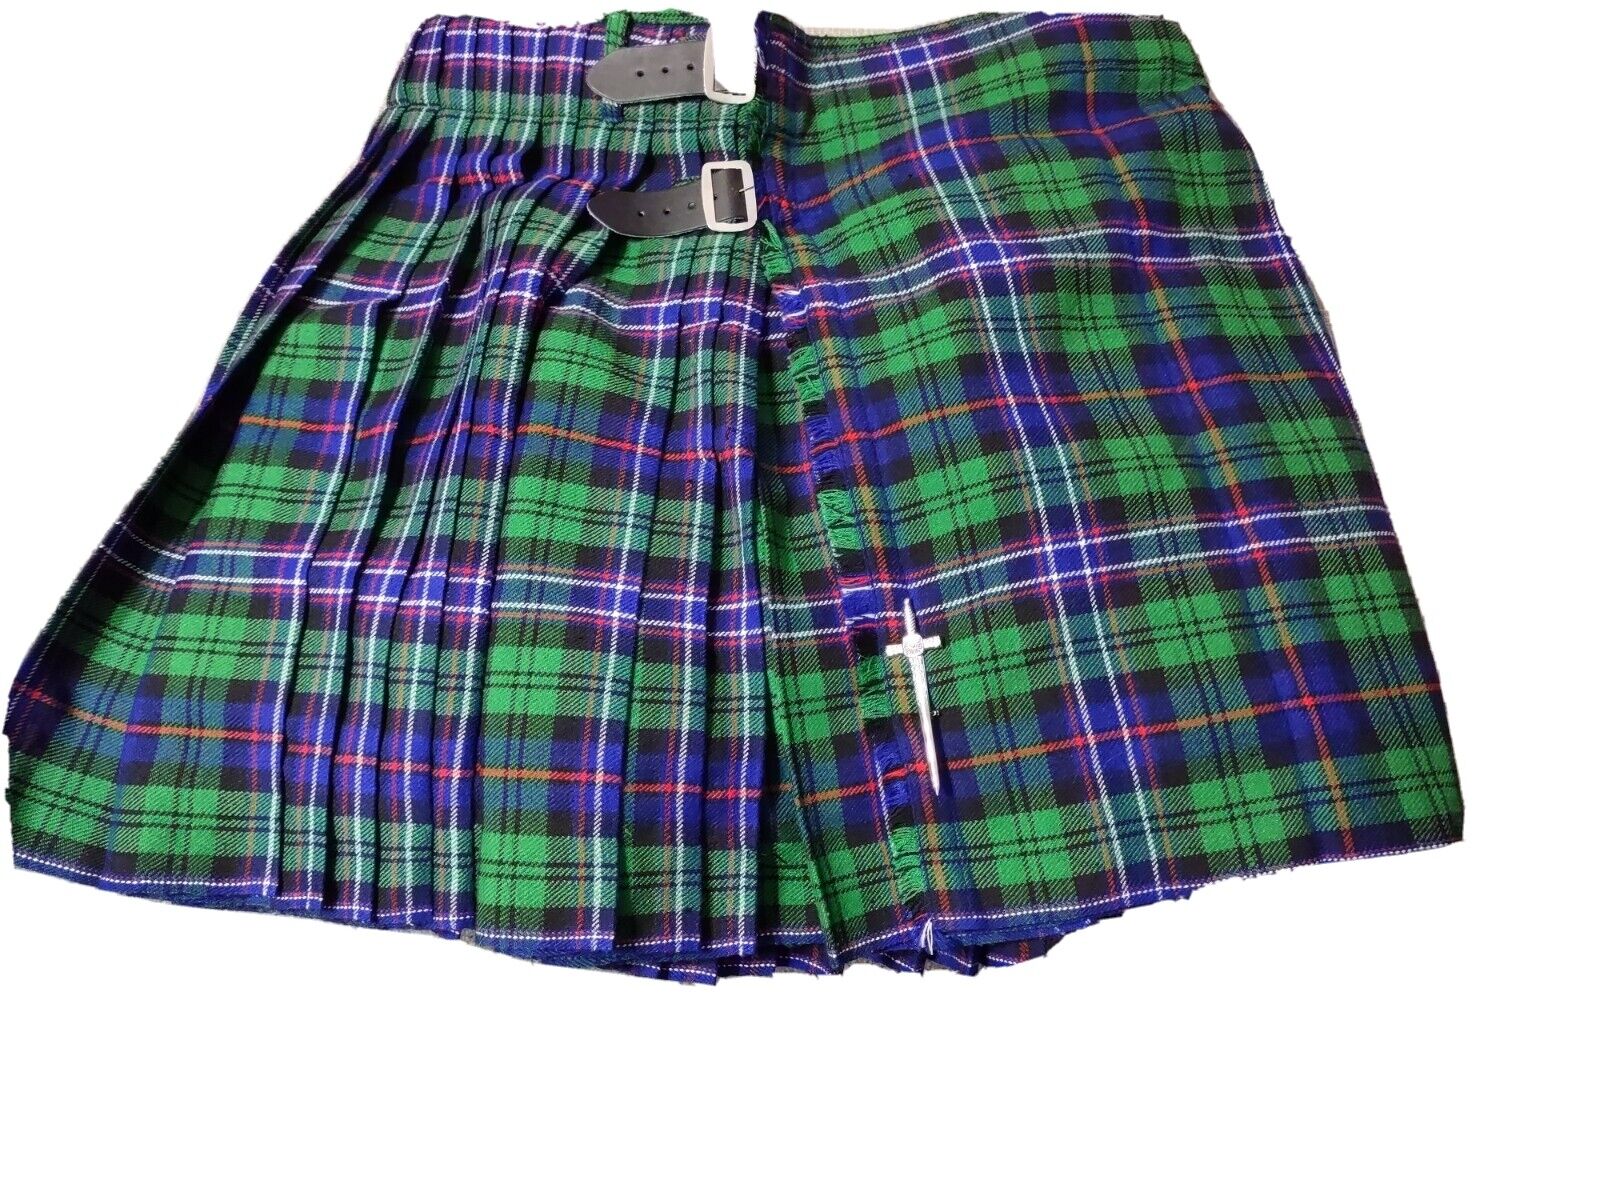 Man's Kilt. Size 40 Waist.  Primary Color Is Green With Blue Red & White Stripes